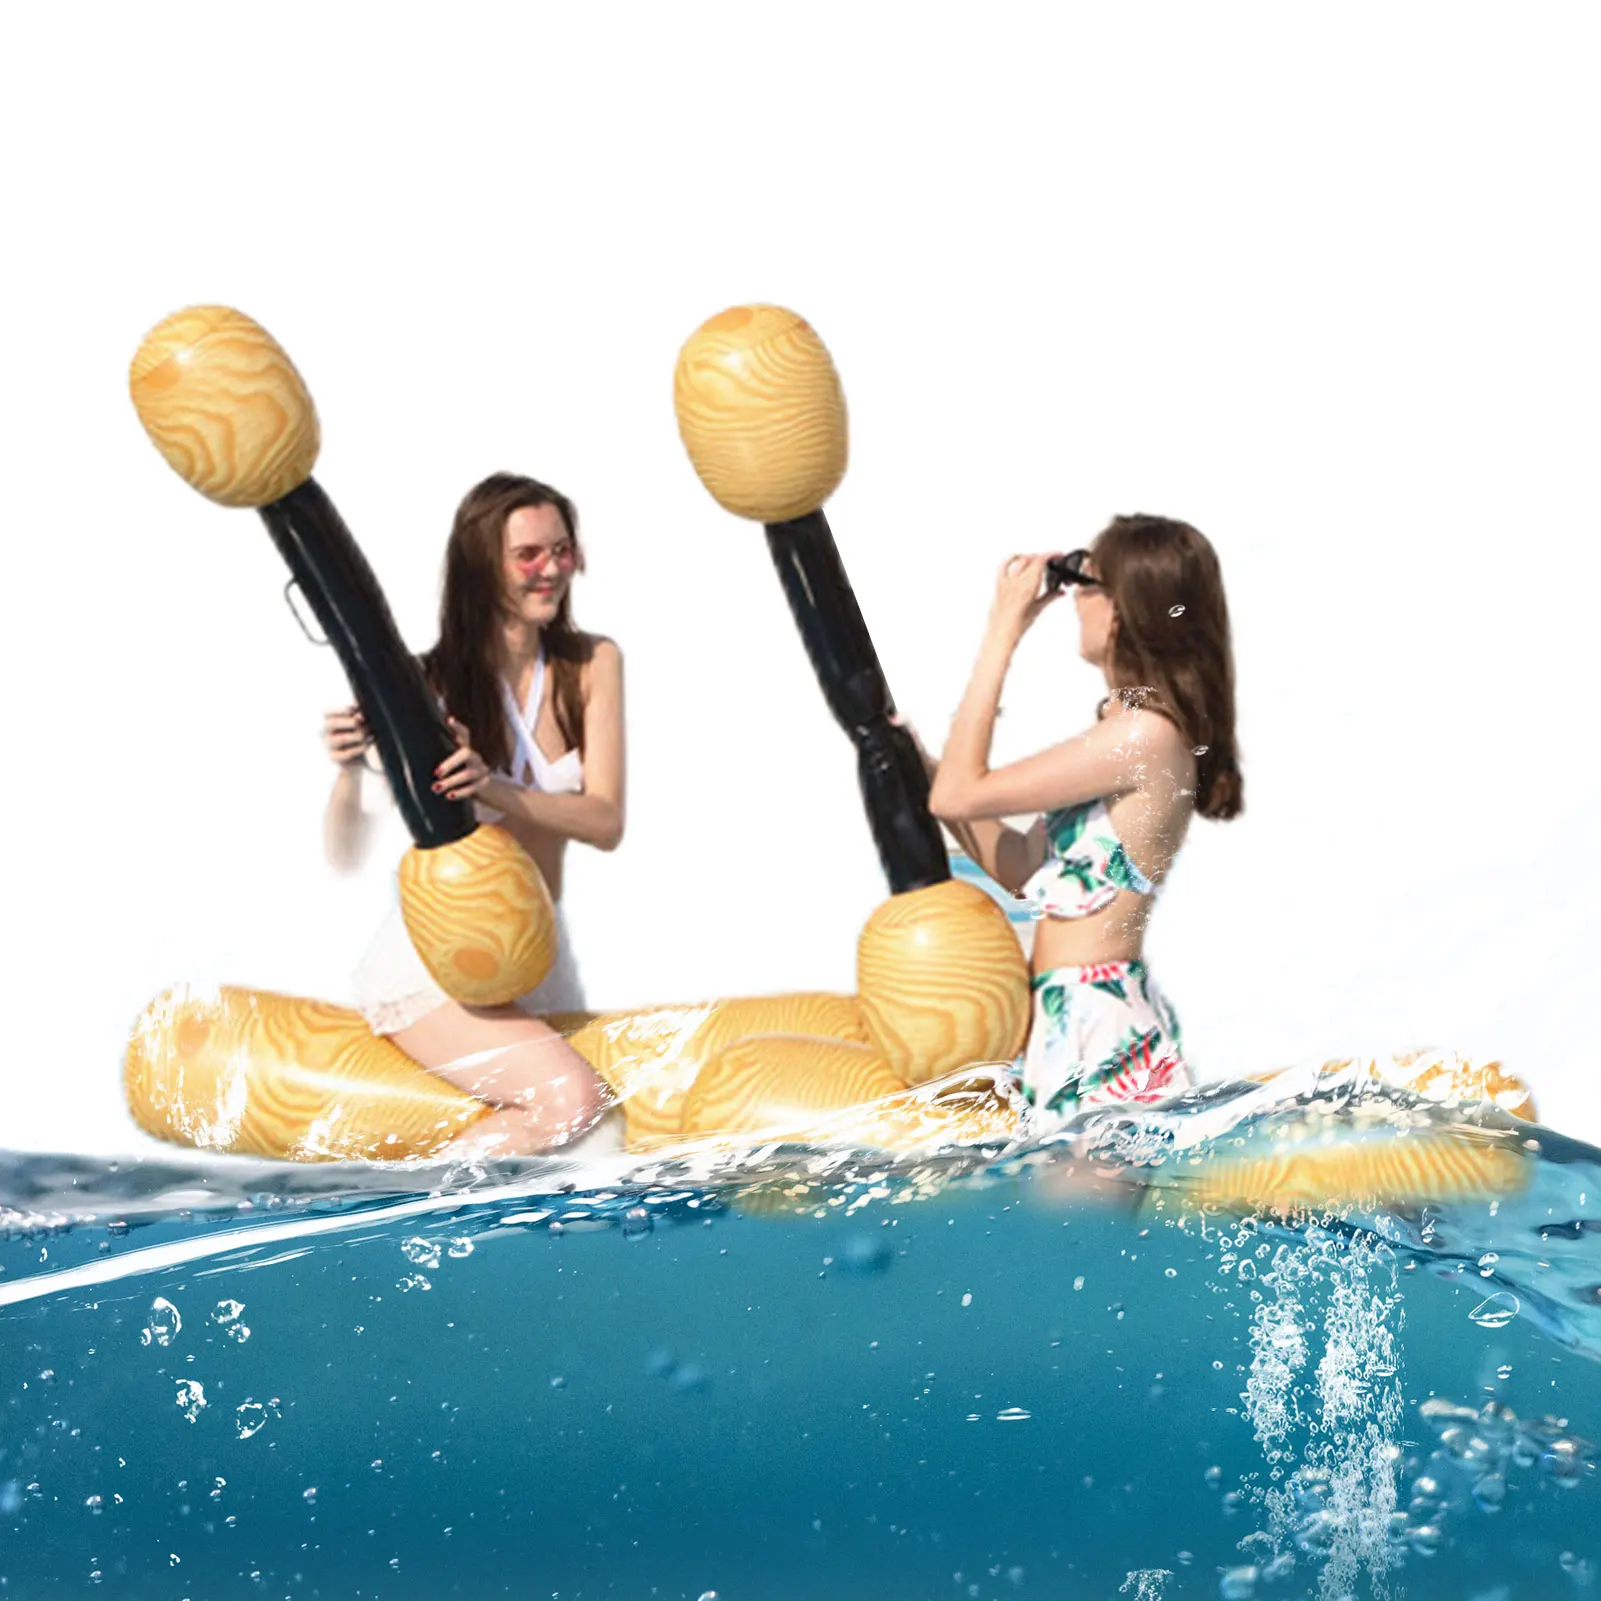 

Inflatable Pool Floats Battle Log Rafts No More Air Leaks Foldable Inflatable Pool Floats Water Sports Games Party Favors